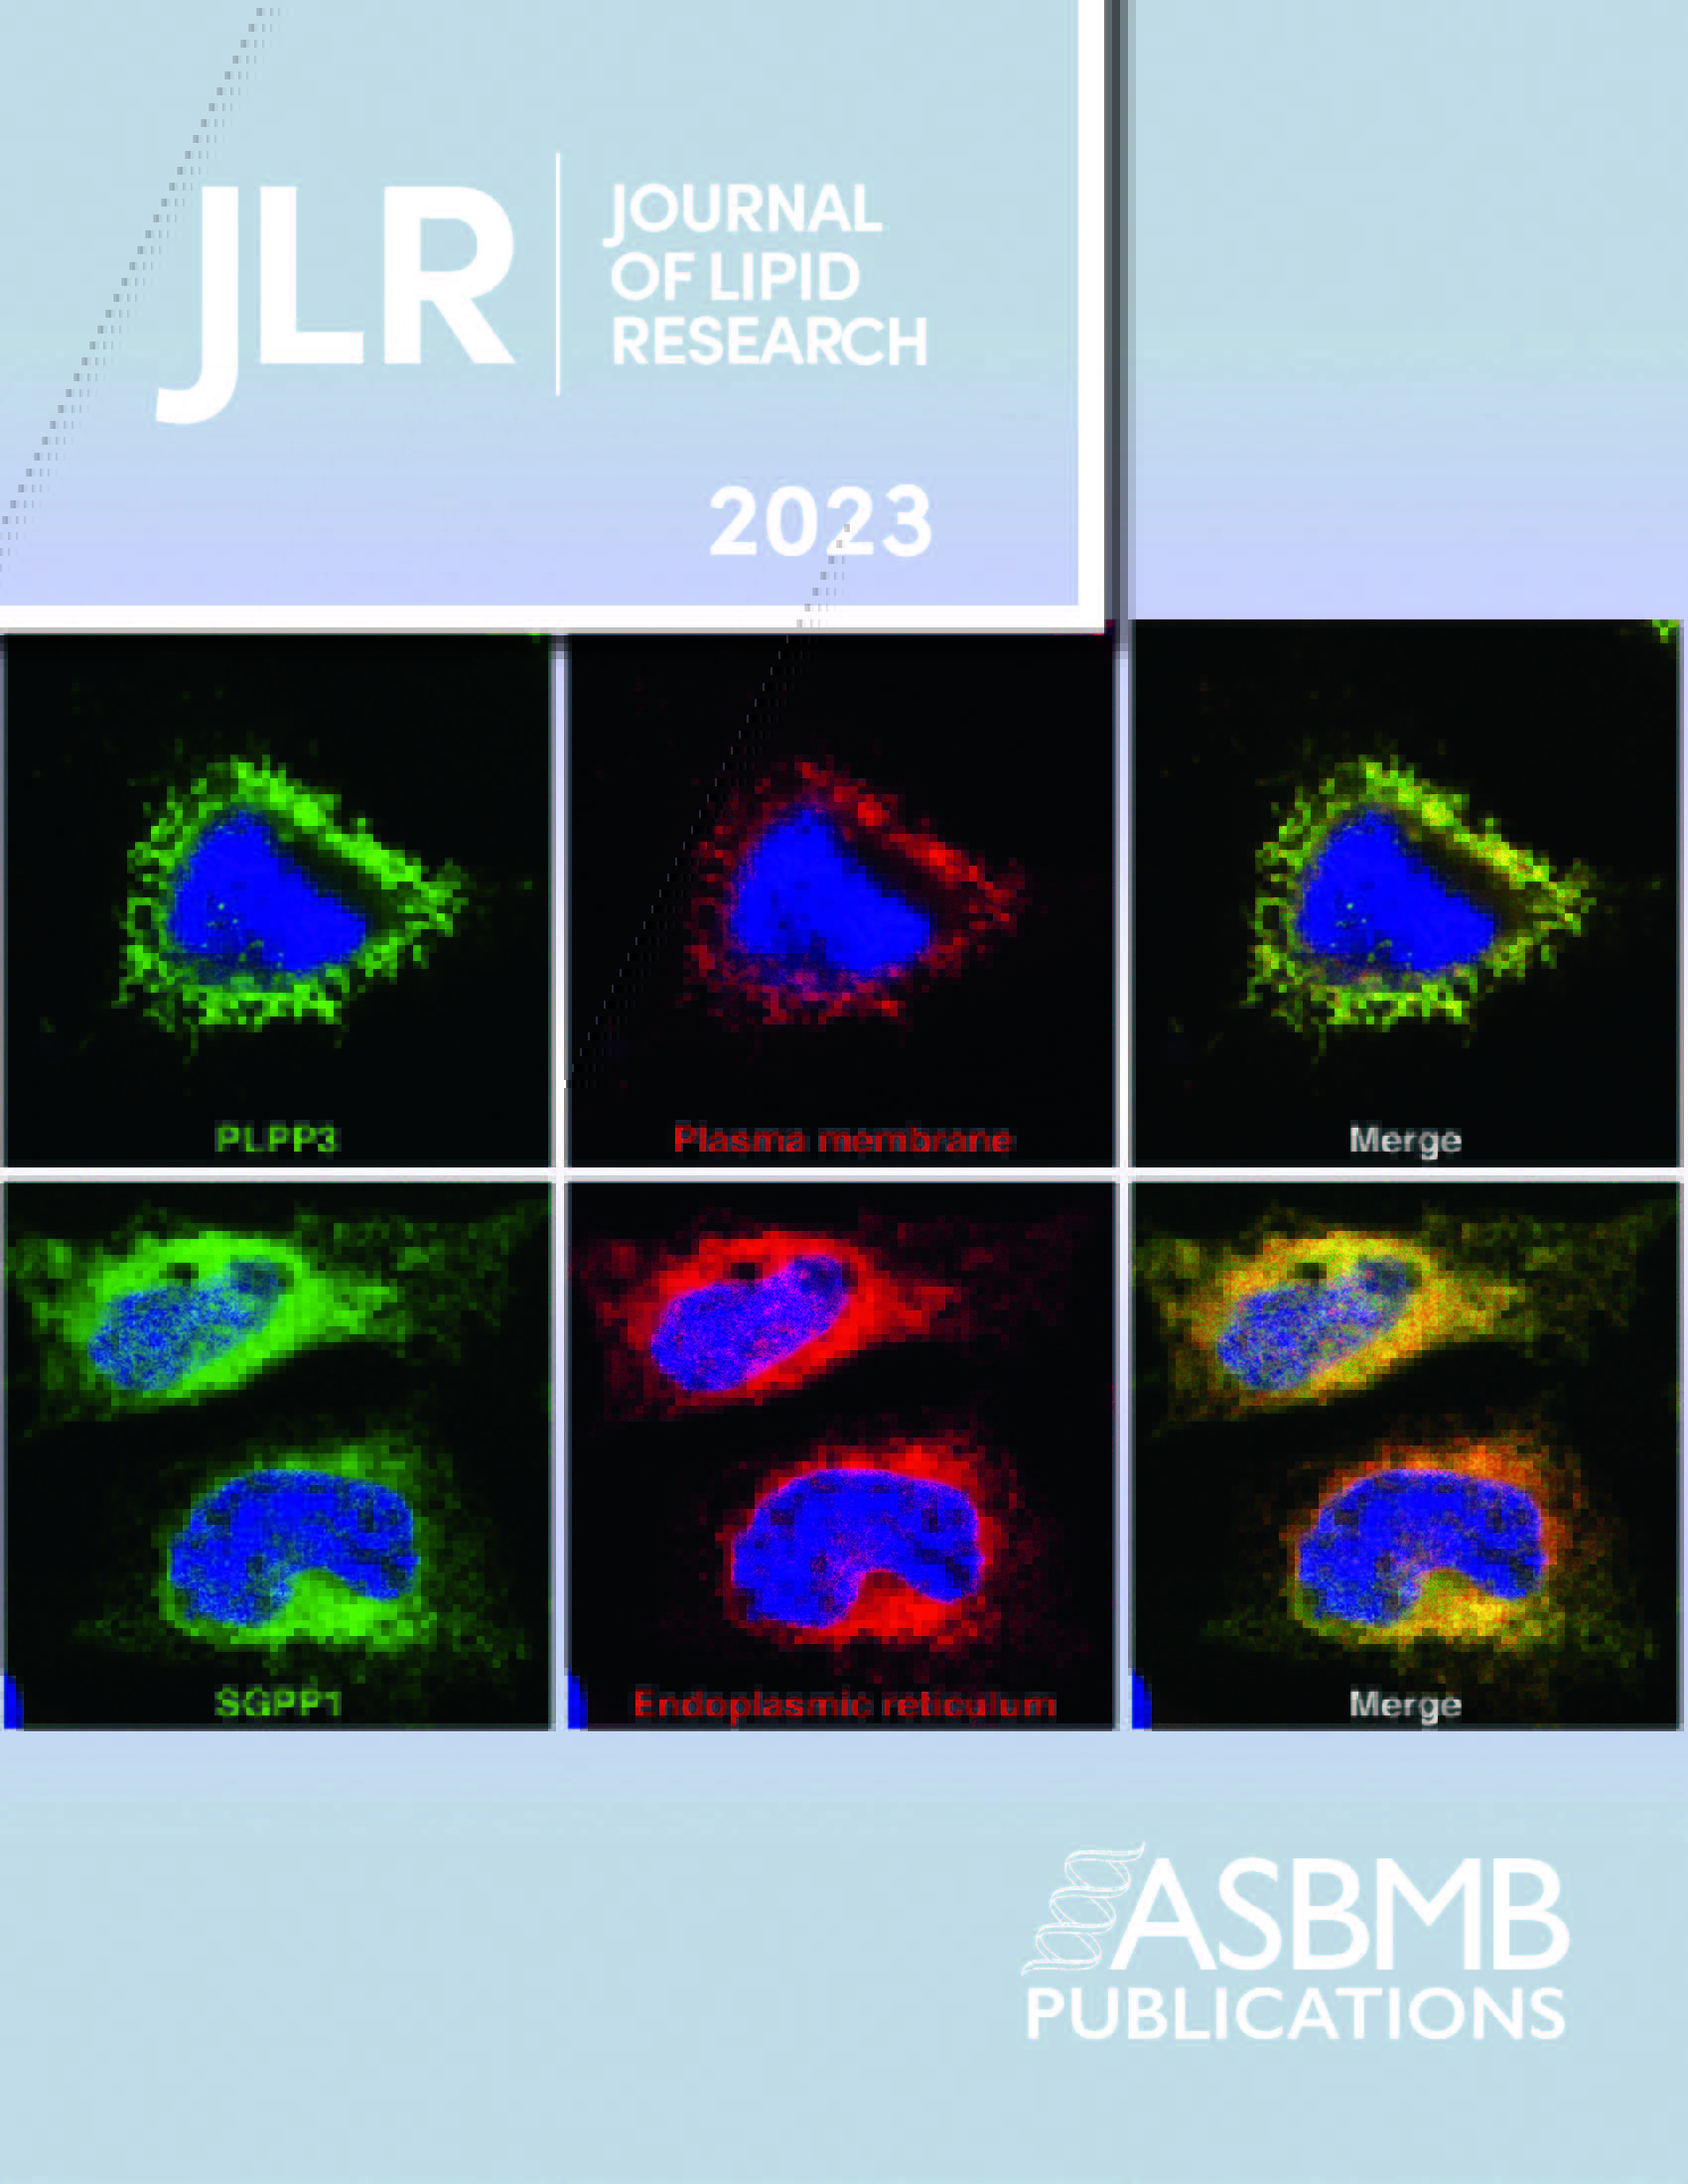 2023 cover of the Journal of Lipid Research.